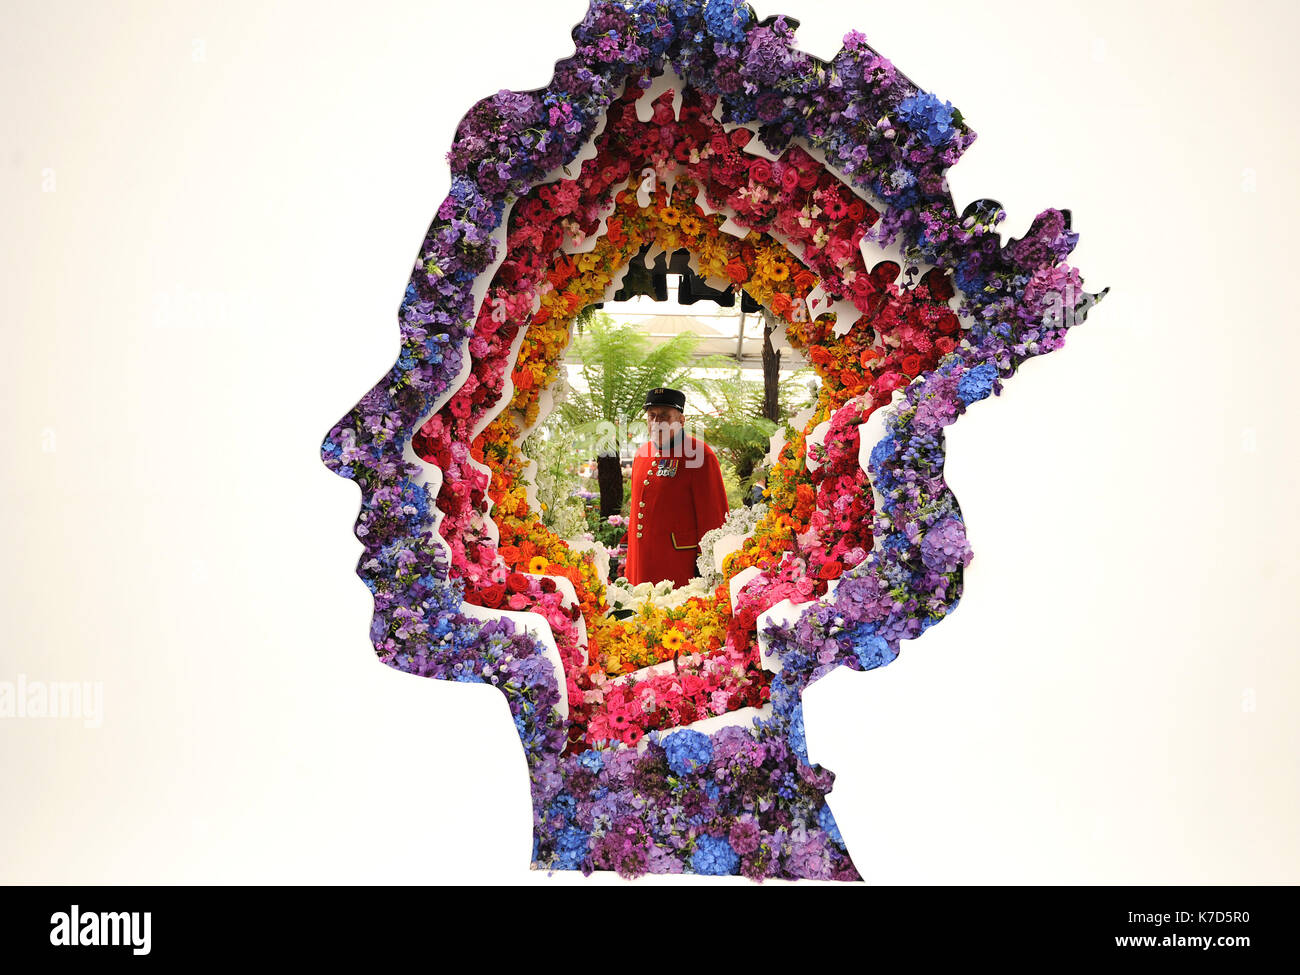 Photo Must Be Credited ©Alpha Press 079965 23/05/2016 A spectacular floral portrait of Queen Elizabeth II celebrating her 90th birthday year. The three metre high, two and a half tonne tribute in the shape of the Queen's head features 10,000 colourful flowers. The eye-catching exhibit by designer Ming Veevers Carter marks the debut of New Covent Garden Flower Market at the RHS Chelsea Flower Show 2016 held at the Royal Hospital in Chelsea, London. Stock Photo